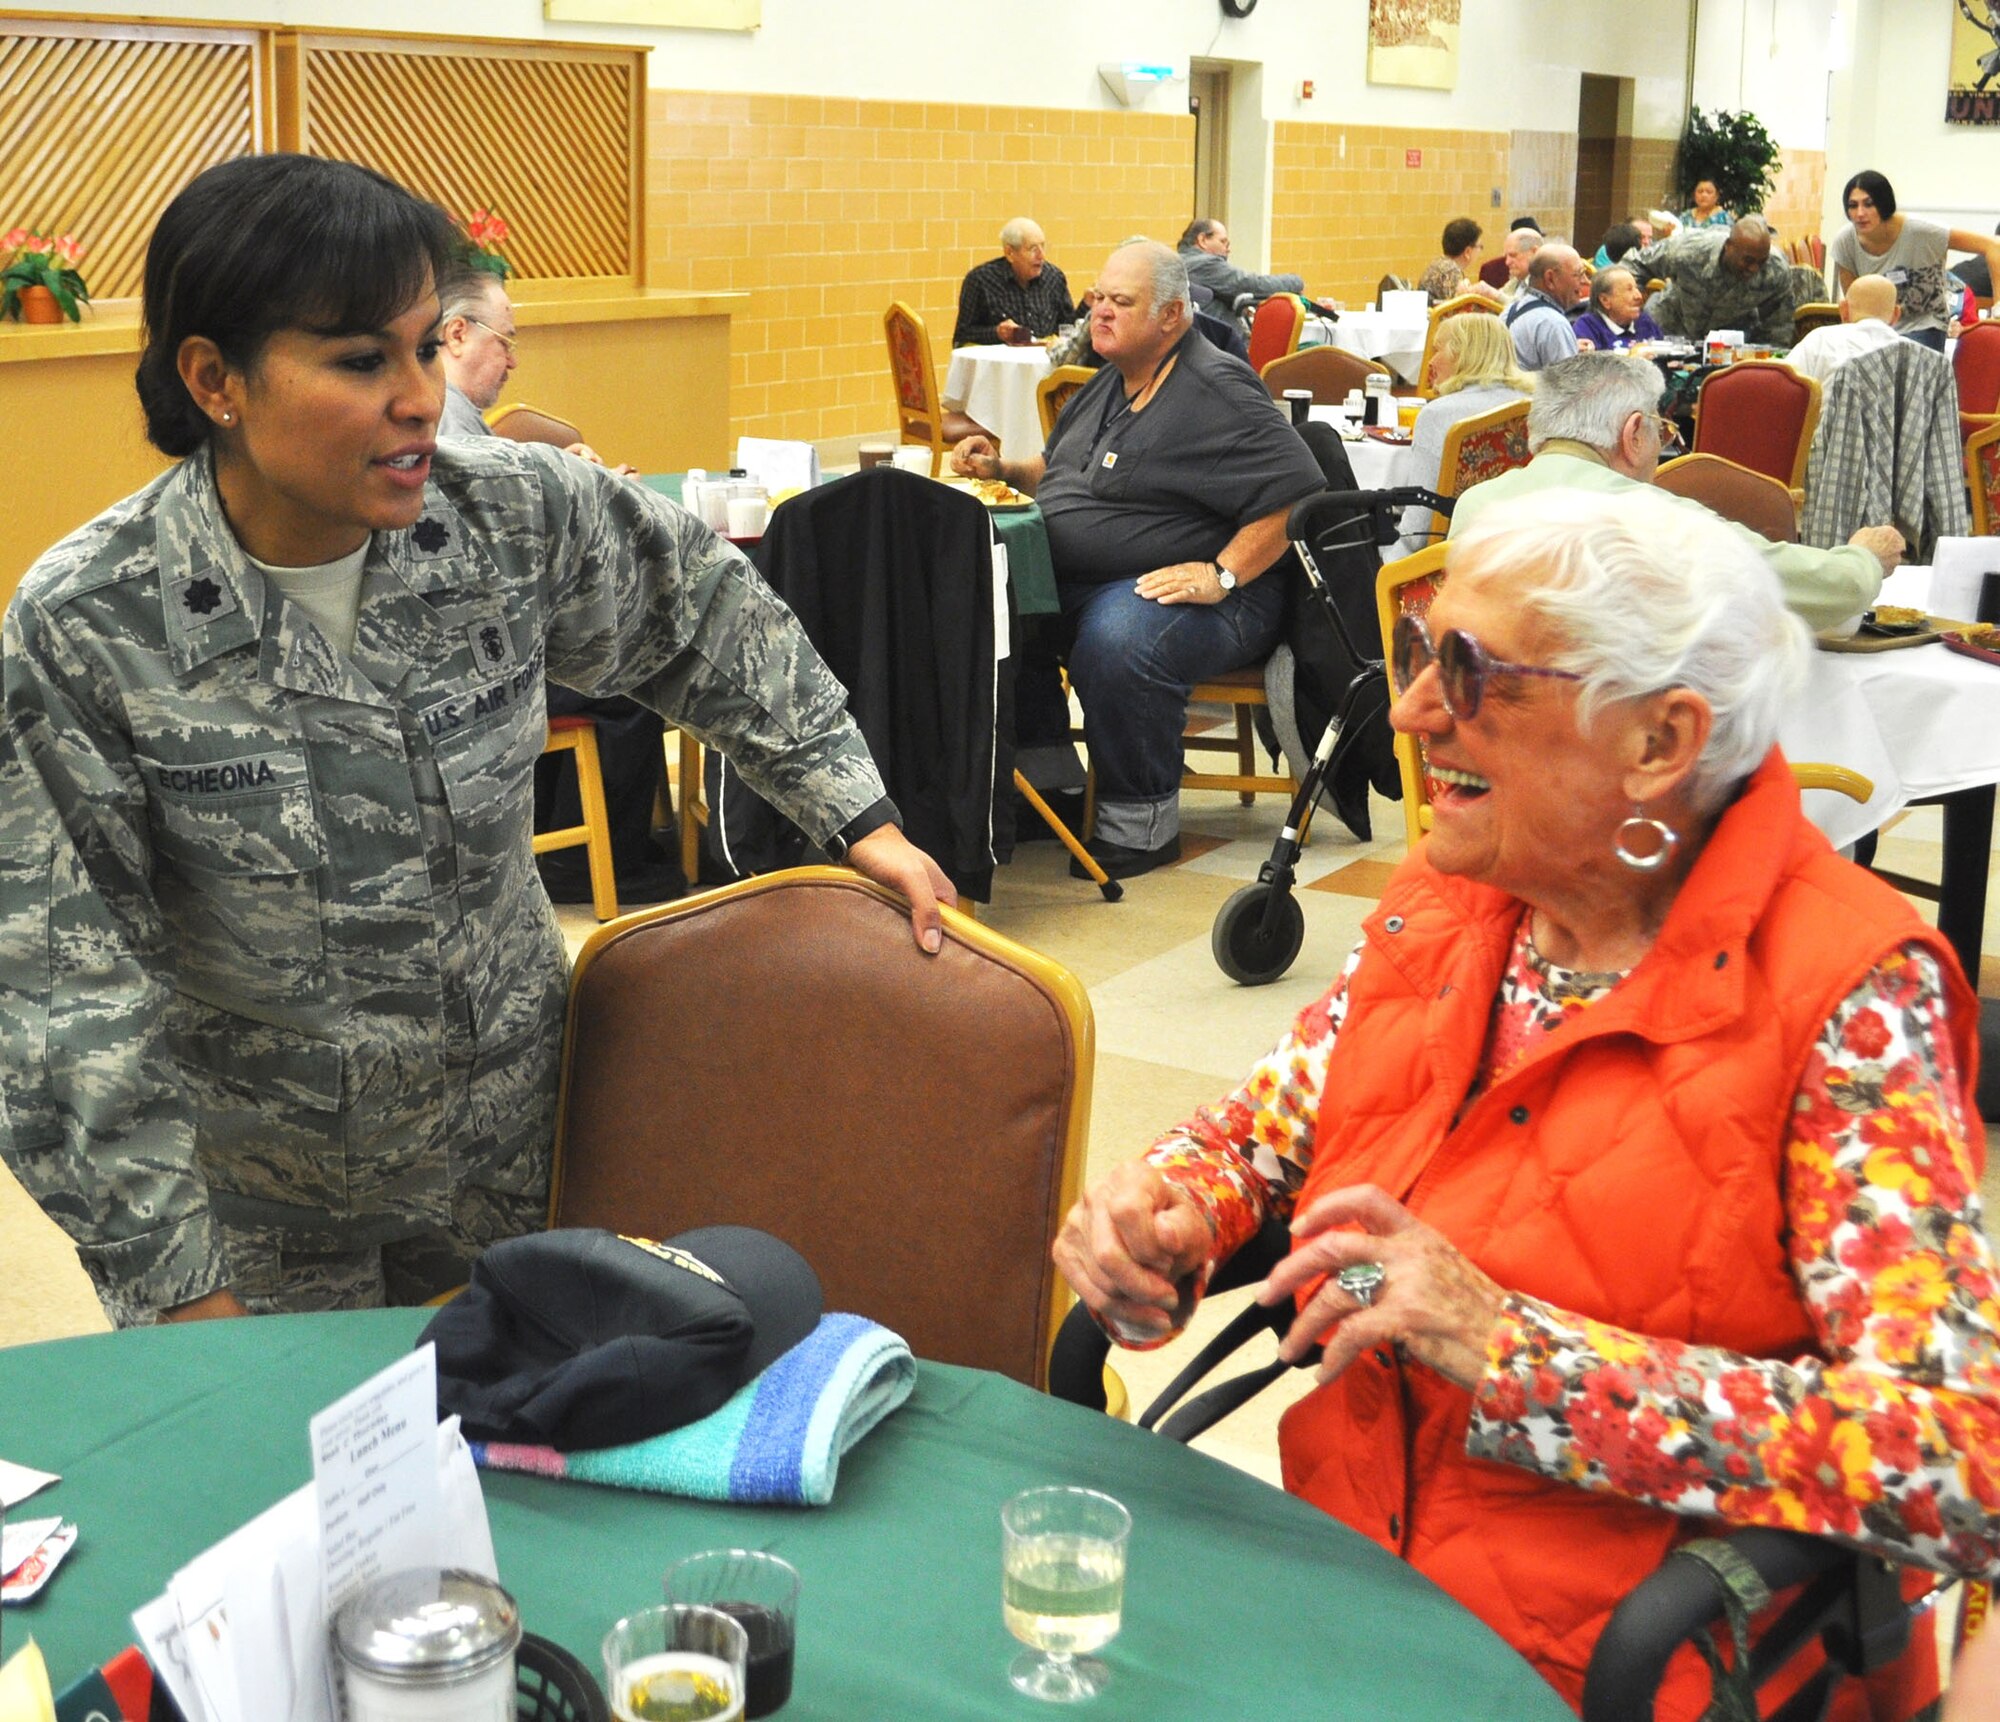 TRAVIS AIR FORCE BASE, Calif. -- Lt. Col. Militzia Echeona, 349th MDS, chats with a 91 years "young" veteran of the Women's Marine Corps, over Thanksgiving dinner at the Yountville Veterans Home. The colonel joined a group of her fellow 349th and 60th AMW volunteers, who served and visited with the veterans over the holiday. (U.S. Air Force photo/SMSgt. (ret) Ellen Hatfield)
